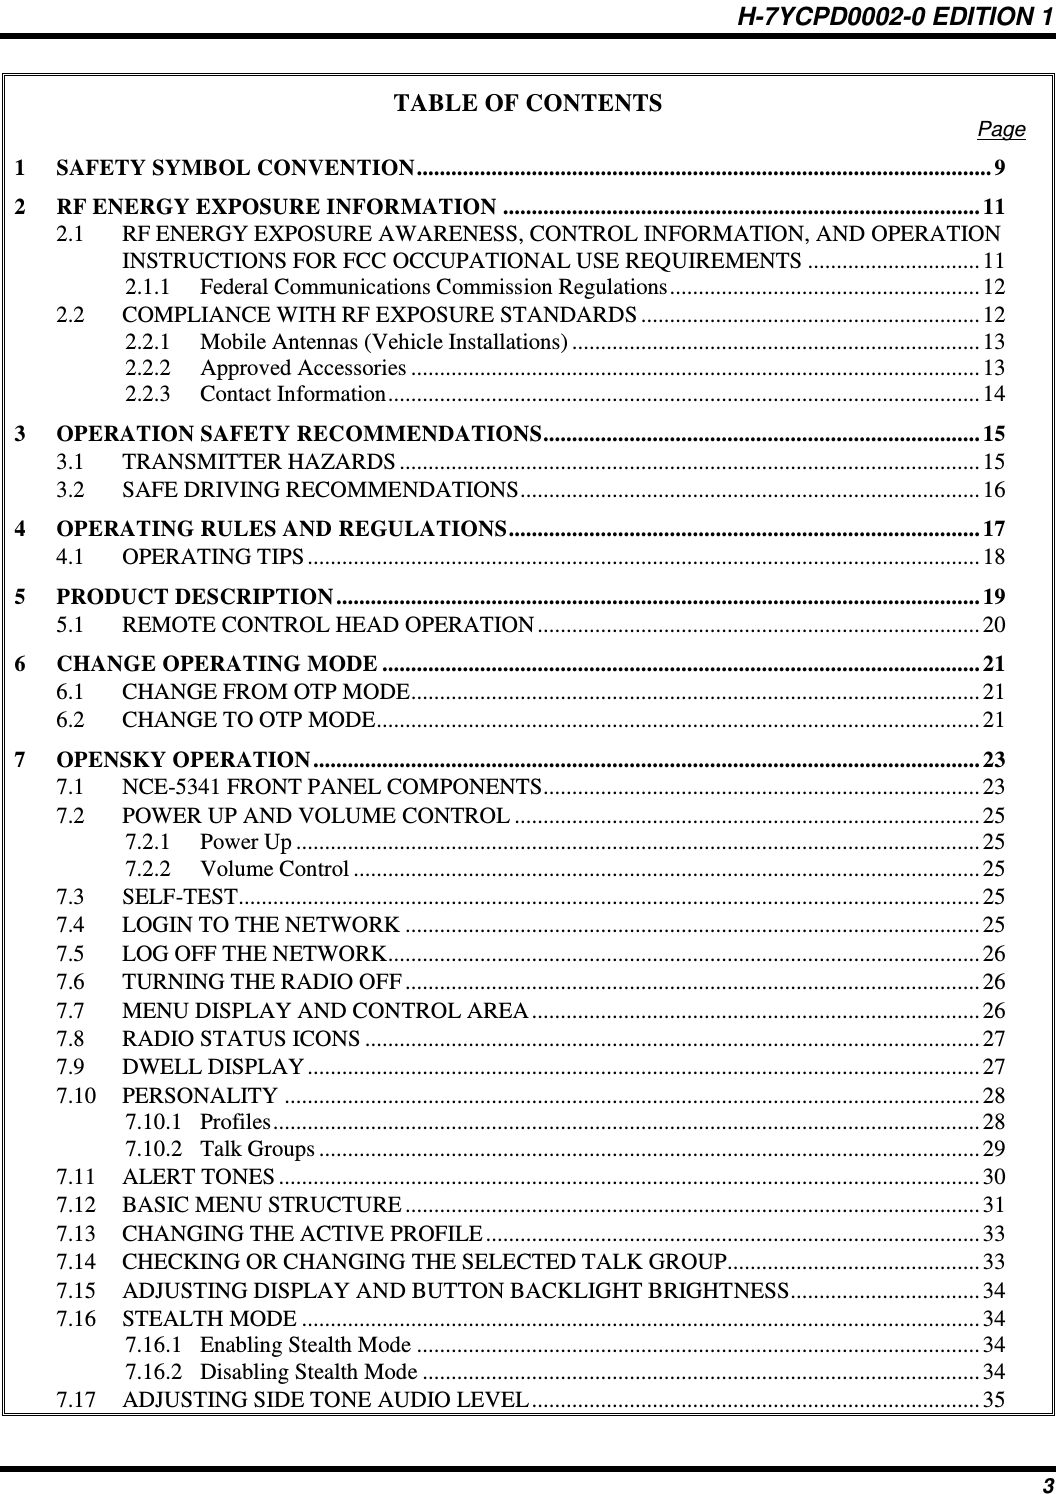 H-7YCPD0002-0 EDITION 1 3 TABLE OF CONTENTS Page 1 SAFETY SYMBOL CONVENTION .................................................................................................... 9 2 RF ENERGY EXPOSURE INFORMATION ................................................................................... 11 2.1 RF ENERGY EXPOSURE AWARENESS, CONTROL INFORMATION, AND OPERATION INSTRUCTIONS FOR FCC OCCUPATIONAL USE REQUIREMENTS .............................. 11 2.1.1 Federal Communications Commission Regulations ...................................................... 12 2.2 COMPLIANCE WITH RF EXPOSURE STANDARDS ........................................................... 12 2.2.1 Mobile Antennas (Vehicle Installations) ....................................................................... 13 2.2.2 Approved Accessories ................................................................................................... 13 2.2.3 Contact Information ....................................................................................................... 14 3 OPERATION SAFETY RECOMMENDATIONS ............................................................................ 15 3.1 TRANSMITTER HAZARDS ..................................................................................................... 15 3.2 SAFE DRIVING RECOMMENDATIONS ................................................................................ 16 4 OPERATING RULES AND REGULATIONS .................................................................................. 17 4.1 OPERATING TIPS ..................................................................................................................... 18 5 PRODUCT DESCRIPTION ................................................................................................................ 19 5.1 REMOTE CONTROL HEAD OPERATION ............................................................................. 20 6 CHANGE OPERATING MODE ........................................................................................................ 21 6.1 CHANGE FROM OTP MODE ................................................................................................... 21 6.2 CHANGE TO OTP MODE......................................................................................................... 21 7 OPENSKY OPERATION .................................................................................................................... 23 7.1 NCE-5341 FRONT PANEL COMPONENTS............................................................................ 23 7.2 POWER UP AND VOLUME CONTROL ................................................................................. 25 7.2.1 Power Up ....................................................................................................................... 25 7.2.2 Volume Control ............................................................................................................. 25 7.3 SELF-TEST ................................................................................................................................. 25 7.4 LOGIN TO THE NETWORK .................................................................................................... 25 7.5 LOG OFF THE NETWORK....................................................................................................... 26 7.6 TURNING THE RADIO OFF .................................................................................................... 26 7.7 MENU DISPLAY AND CONTROL AREA .............................................................................. 26 7.8 RADIO STATUS ICONS ........................................................................................................... 27 7.9 DWELL DISPLAY ..................................................................................................................... 27 7.10 PERSONALITY ......................................................................................................................... 28 7.10.1 Profiles ........................................................................................................................... 28 7.10.2 Talk Groups ................................................................................................................... 29 7.11 ALERT TONES .......................................................................................................................... 30 7.12 BASIC MENU STRUCTURE .................................................................................................... 31 7.13 CHANGING THE ACTIVE PROFILE ...................................................................................... 33 7.14 CHECKING OR CHANGING THE SELECTED TALK GROUP............................................ 33 7.15 ADJUSTING DISPLAY AND BUTTON BACKLIGHT BRIGHTNESS ................................. 34 7.16 STEALTH MODE ...................................................................................................................... 34 7.16.1 Enabling Stealth Mode .................................................................................................. 34 7.16.2 Disabling Stealth Mode ................................................................................................. 34 7.17 ADJUSTING SIDE TONE AUDIO LEVEL .............................................................................. 35 